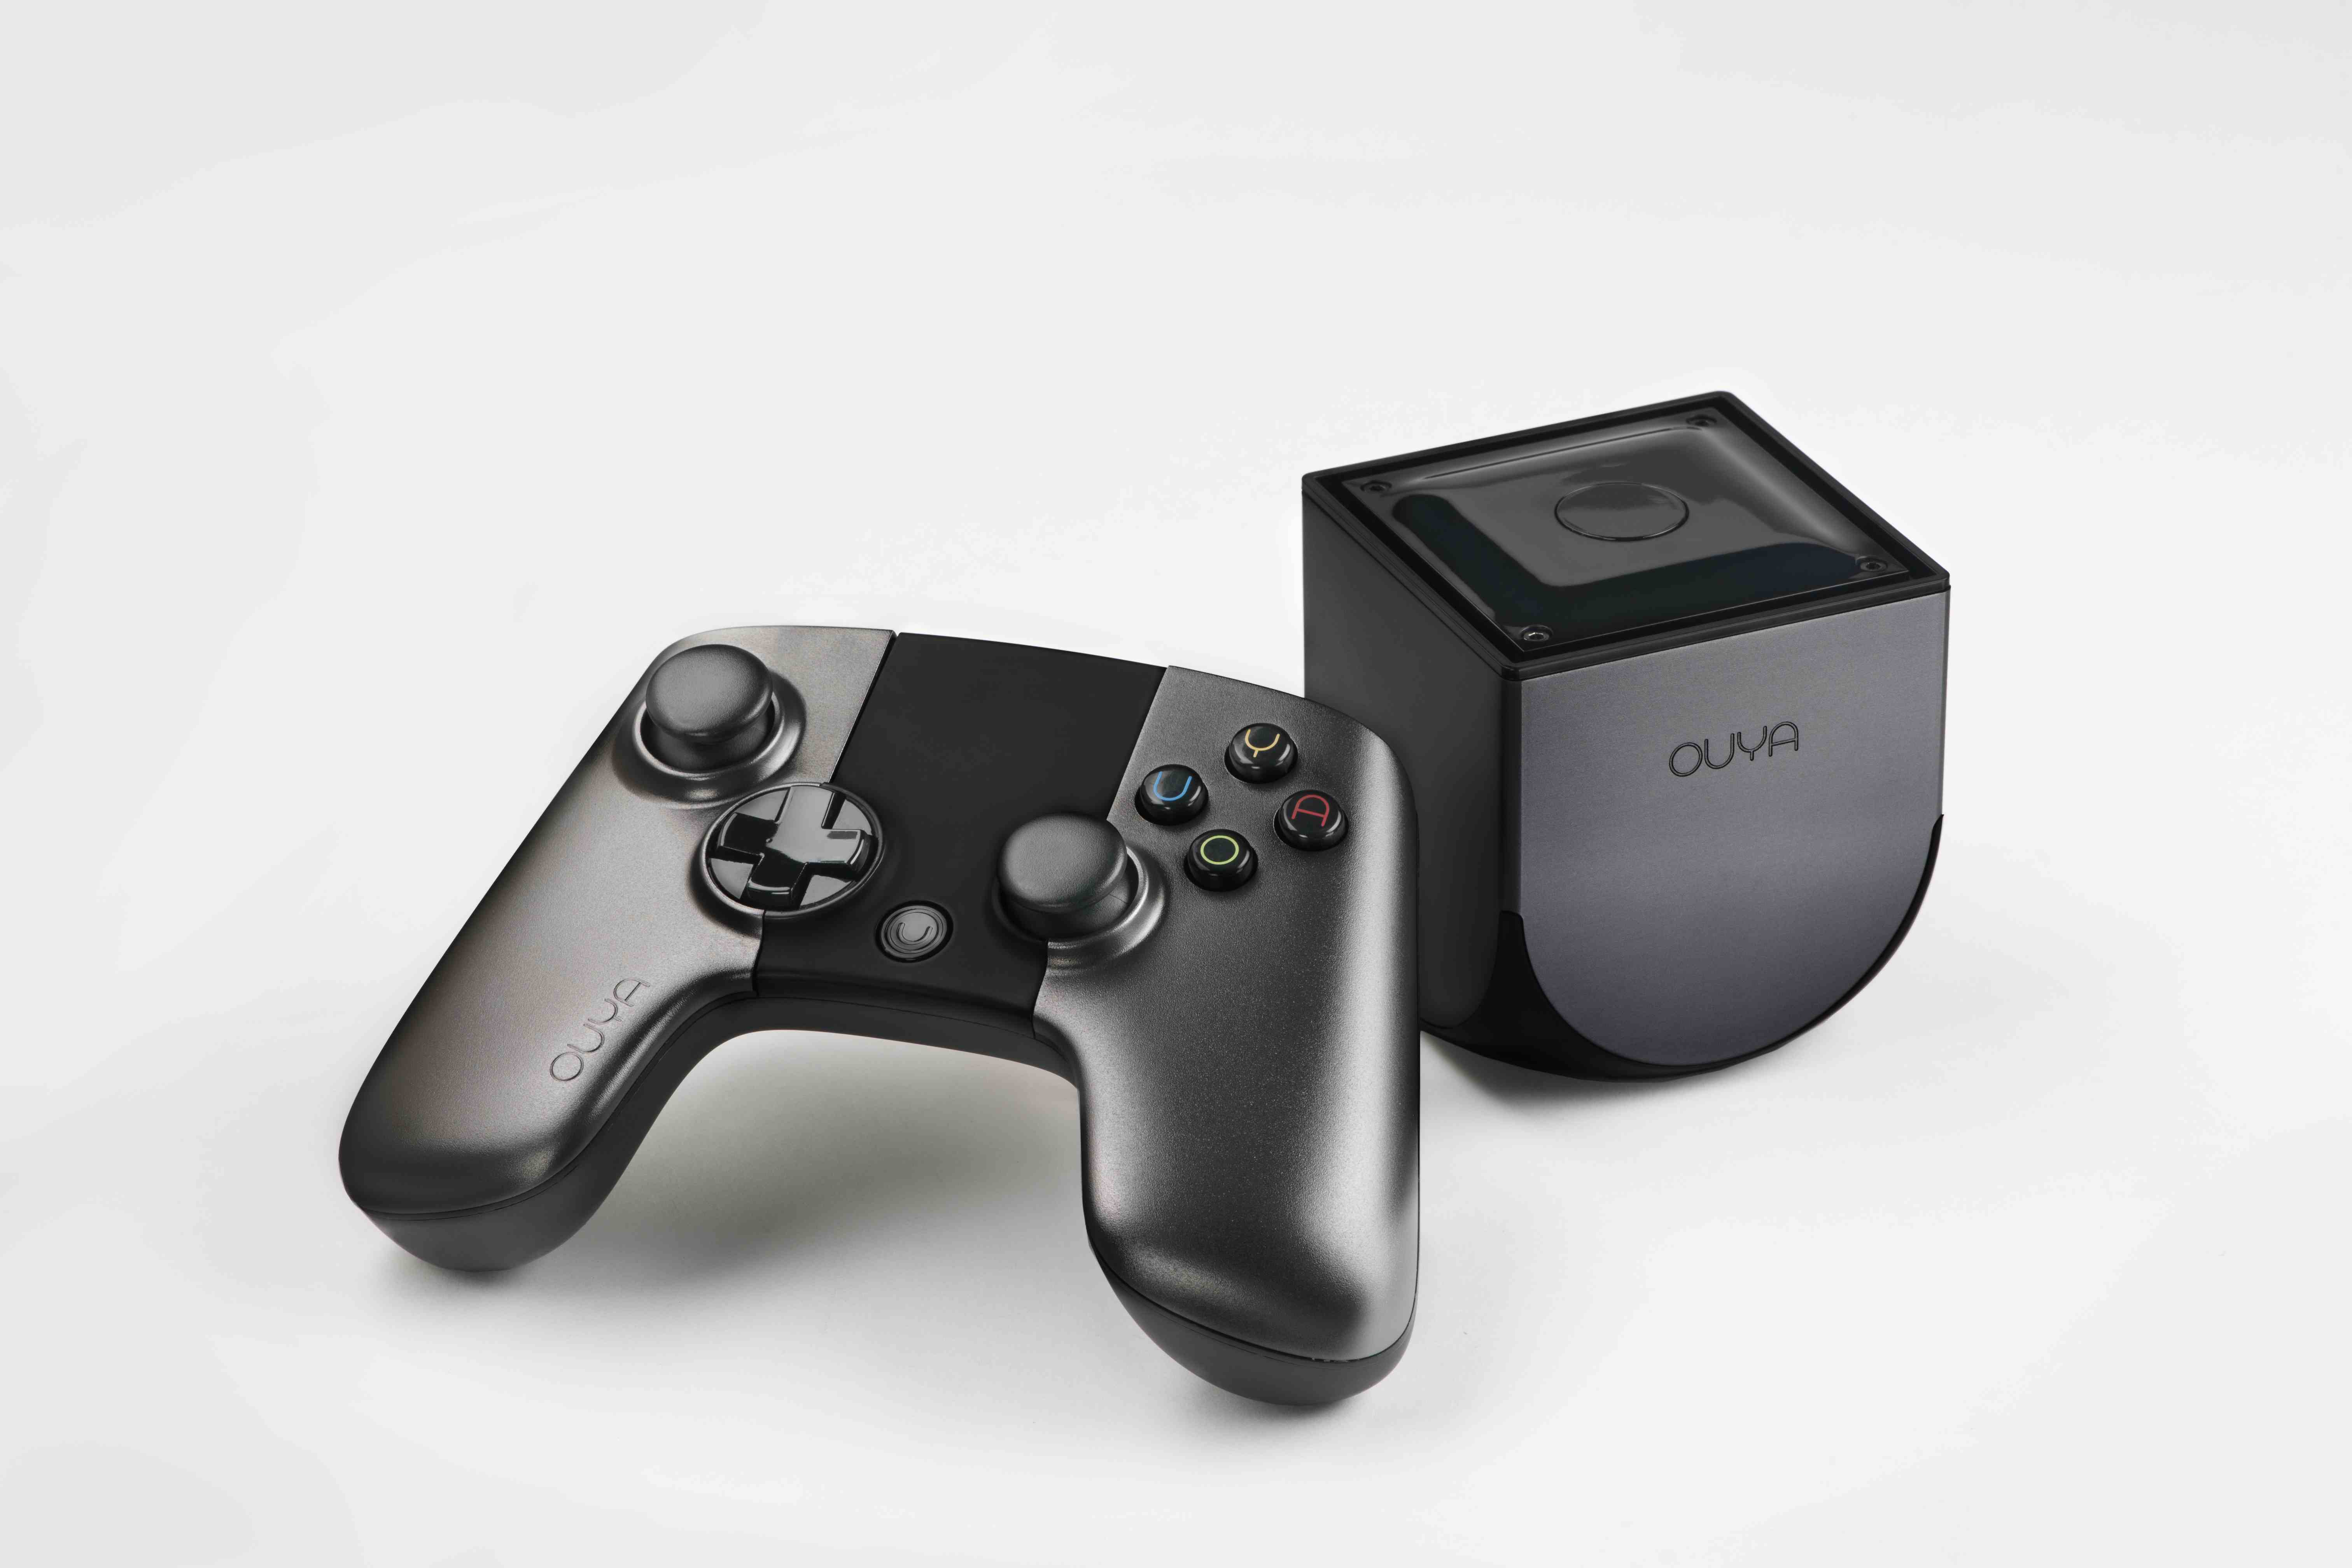 Ouya – Geek gaming for the masses